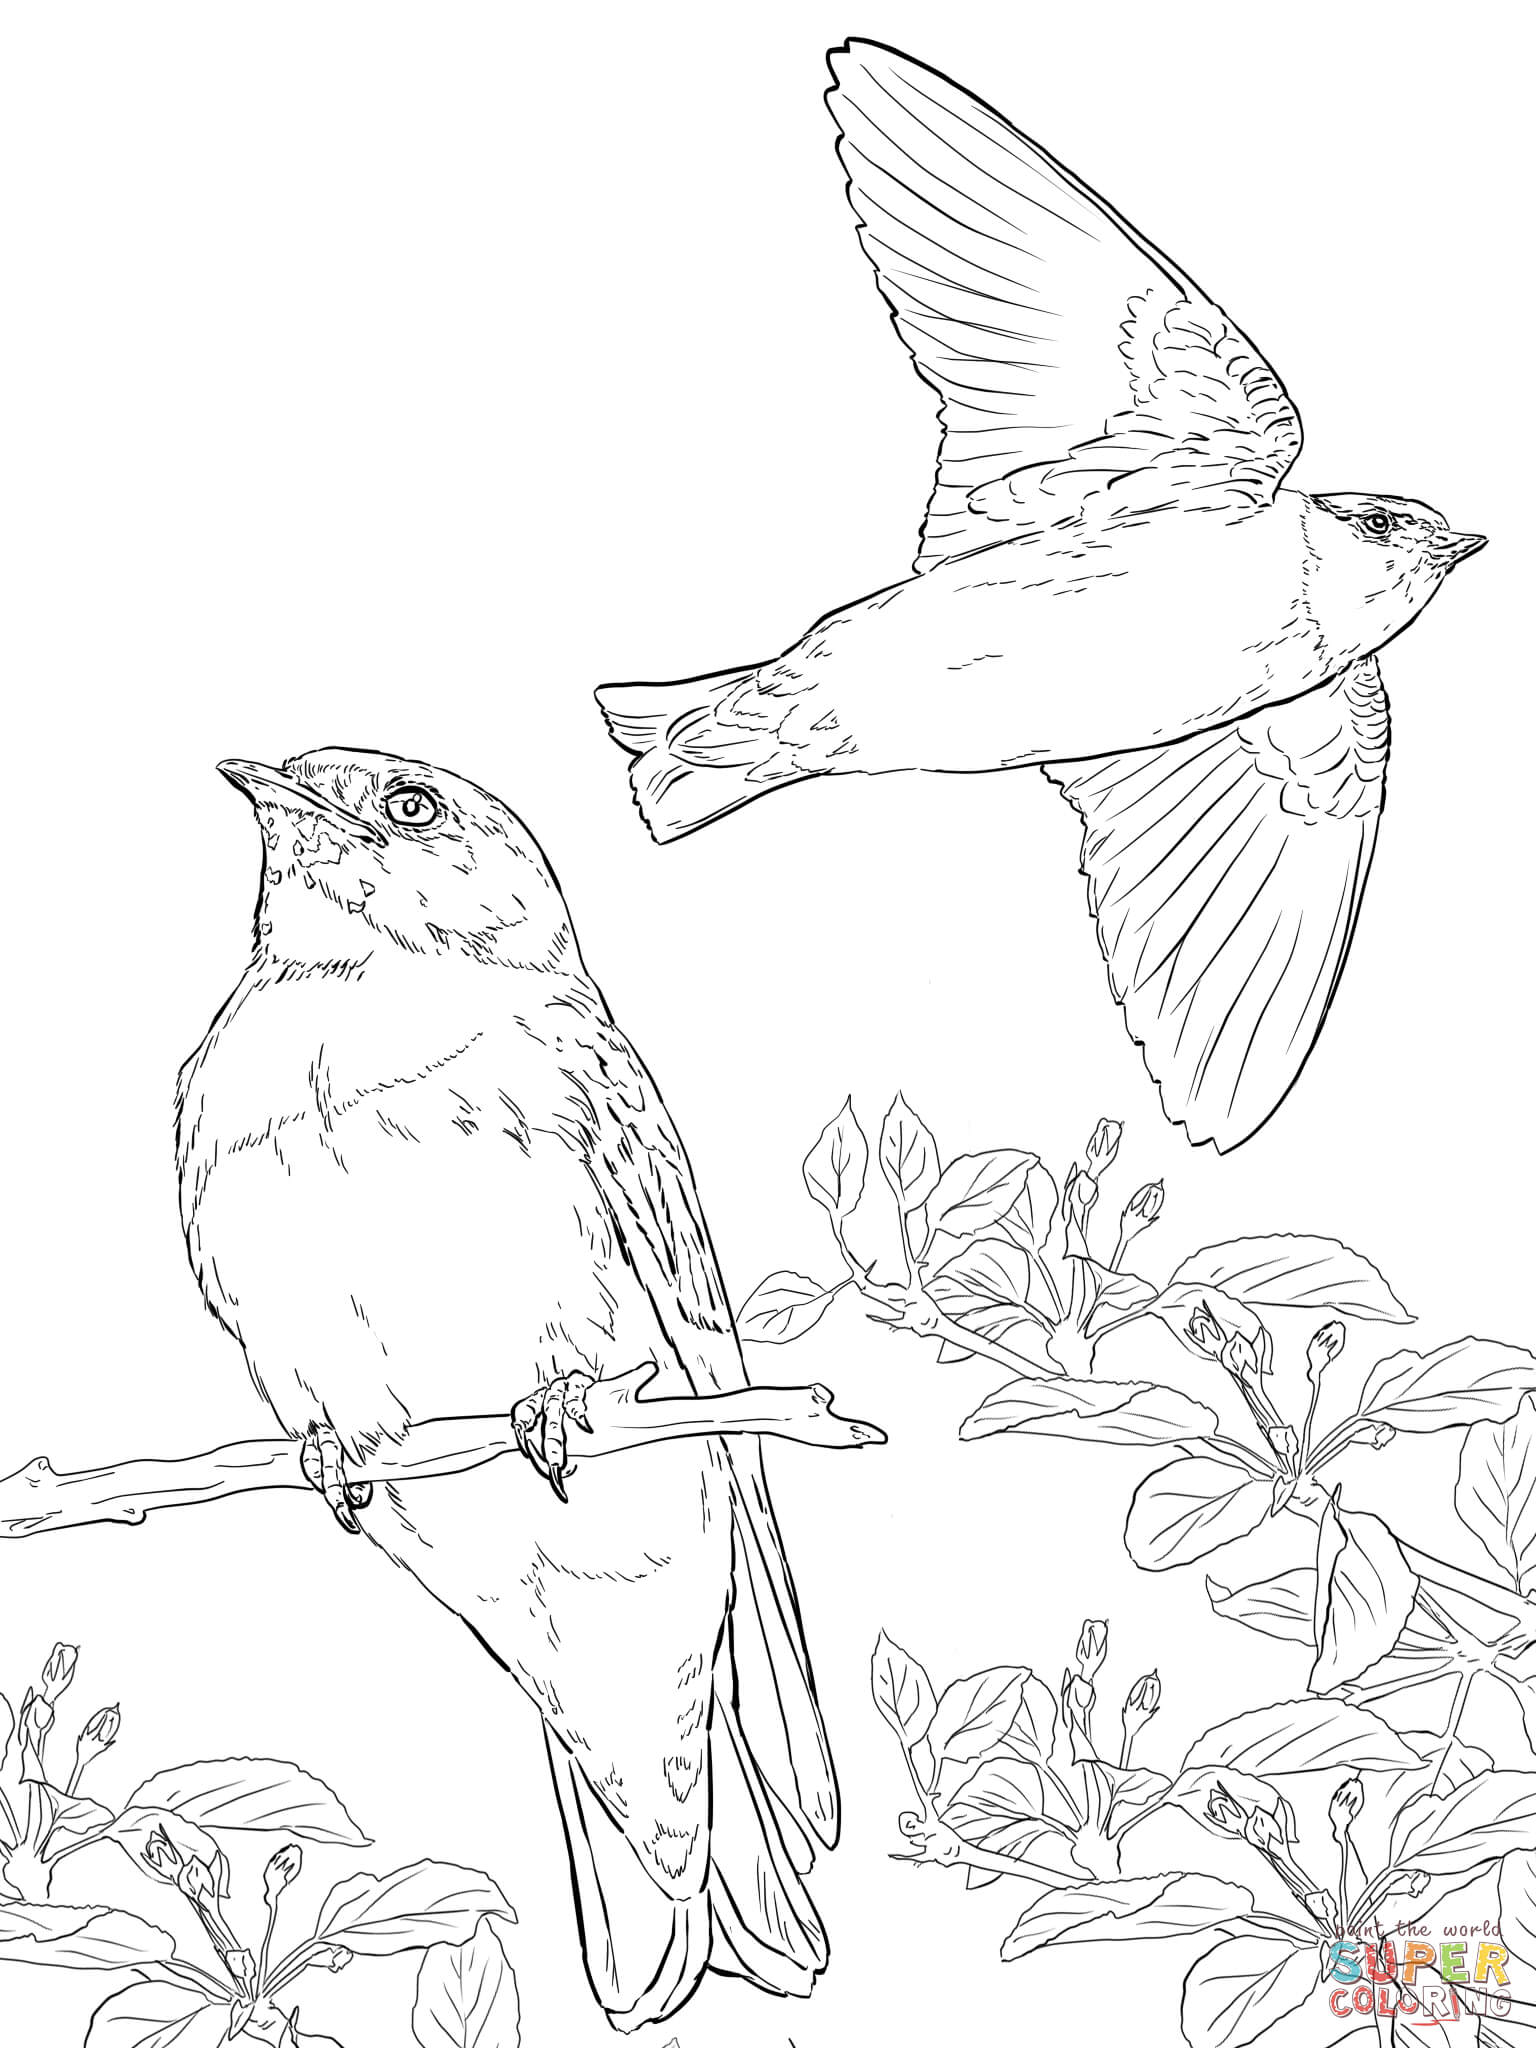 Tree Swallow coloring #1, Download drawings